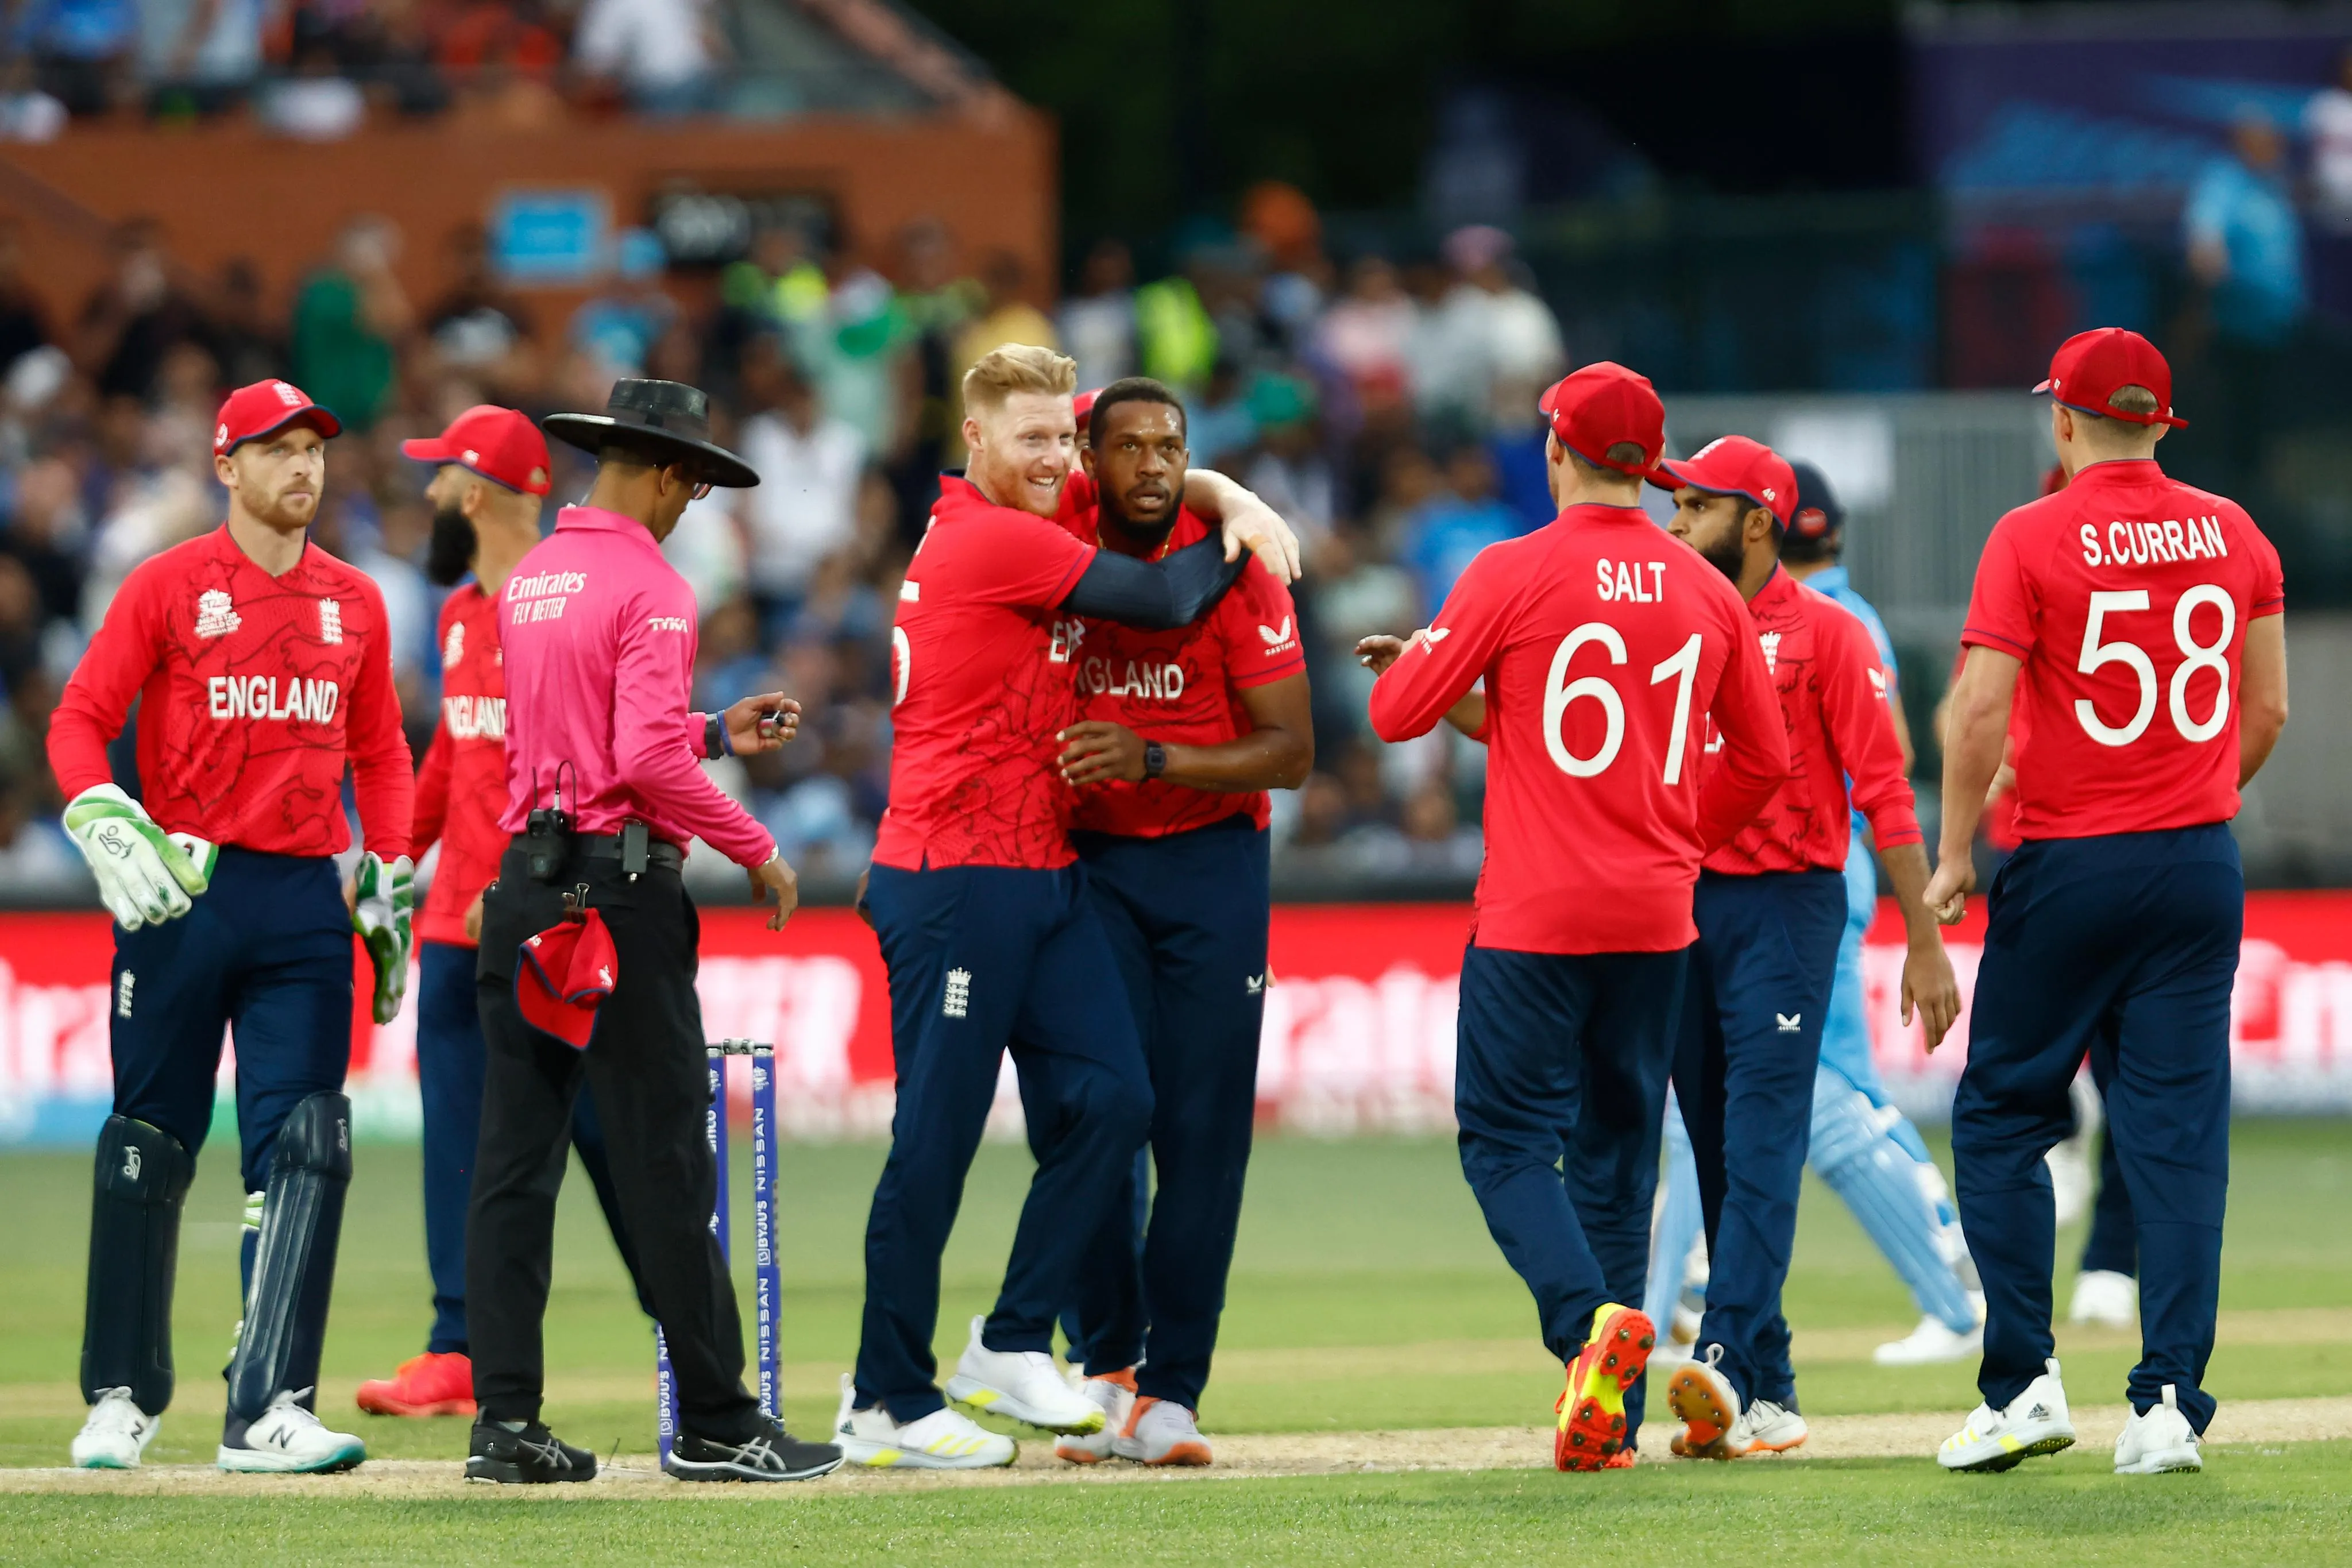 ICC World T20 | Twitter reacts as England turn into Pakistan with combination of catch drop, missed run out and overthrow